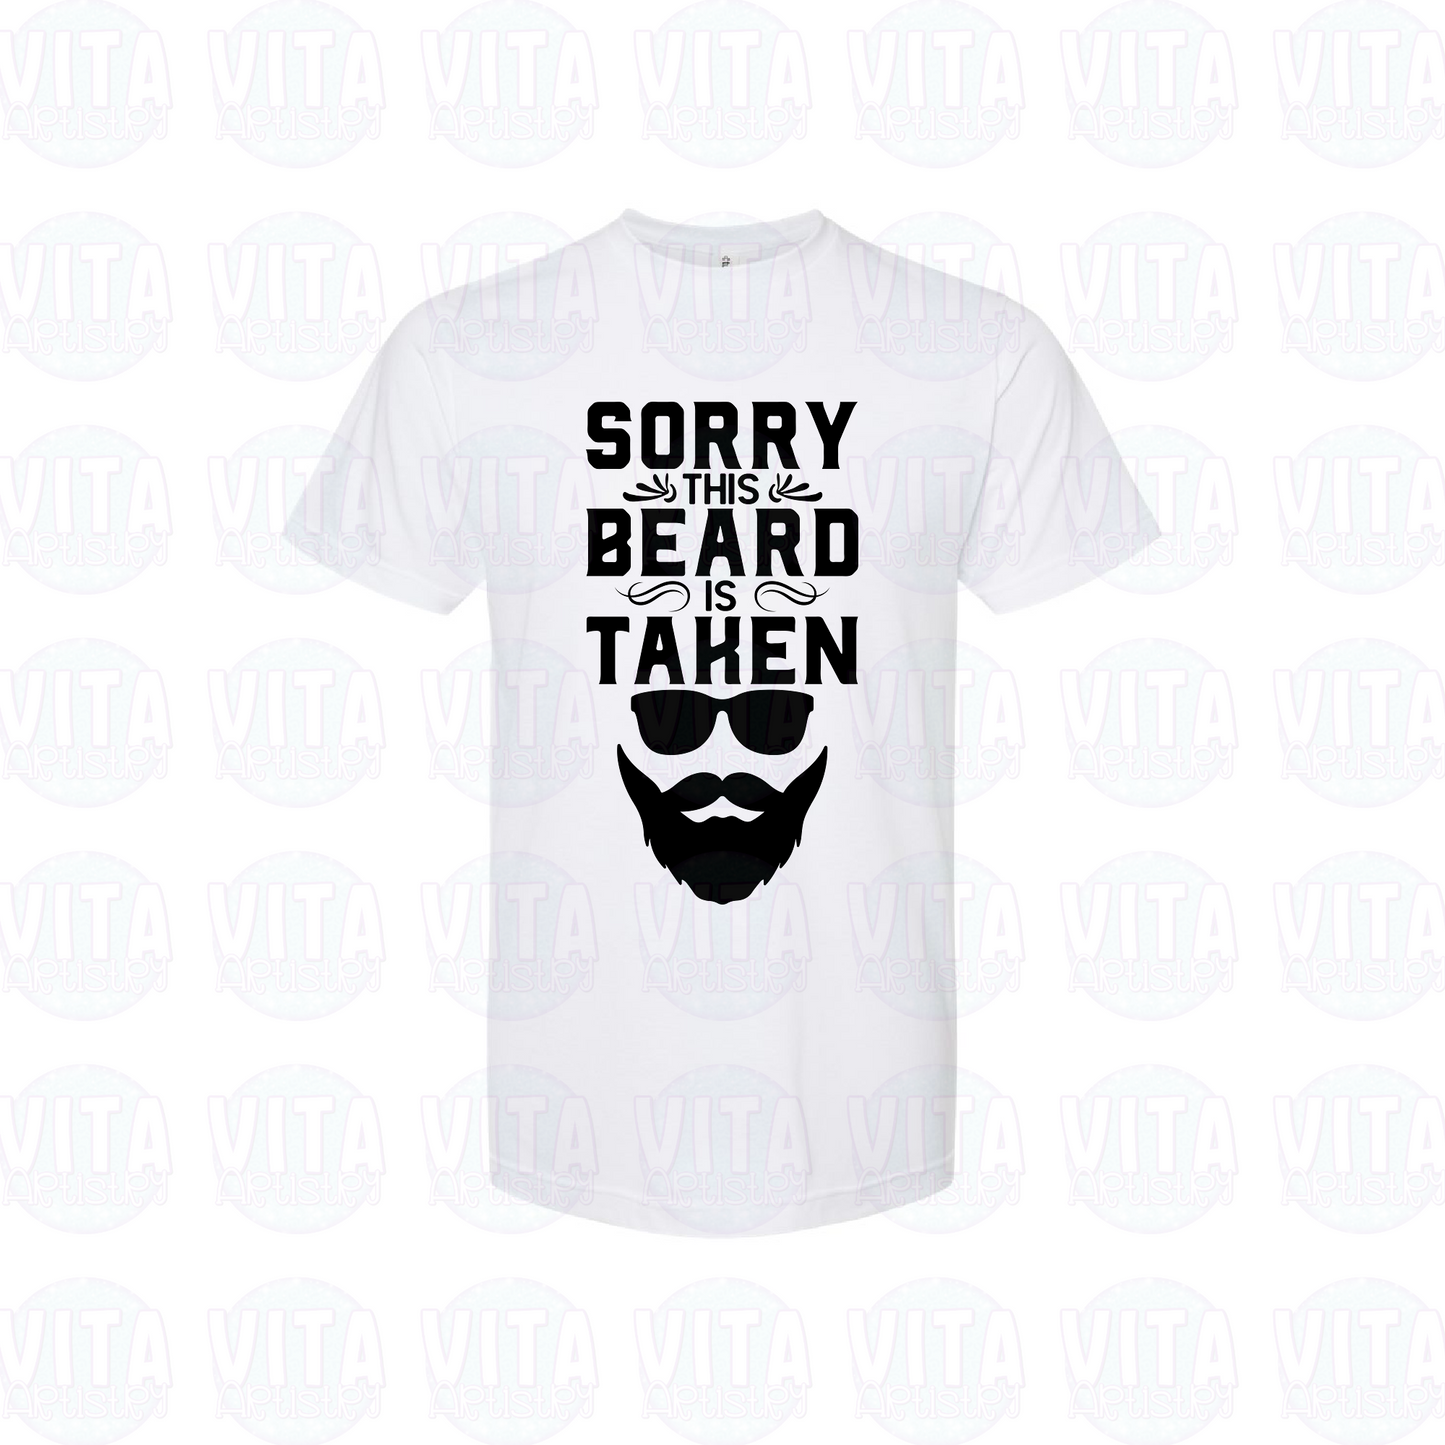 Sorry This Beard is Taken - Male Soft Style Crewneck (Choose your shirt color)